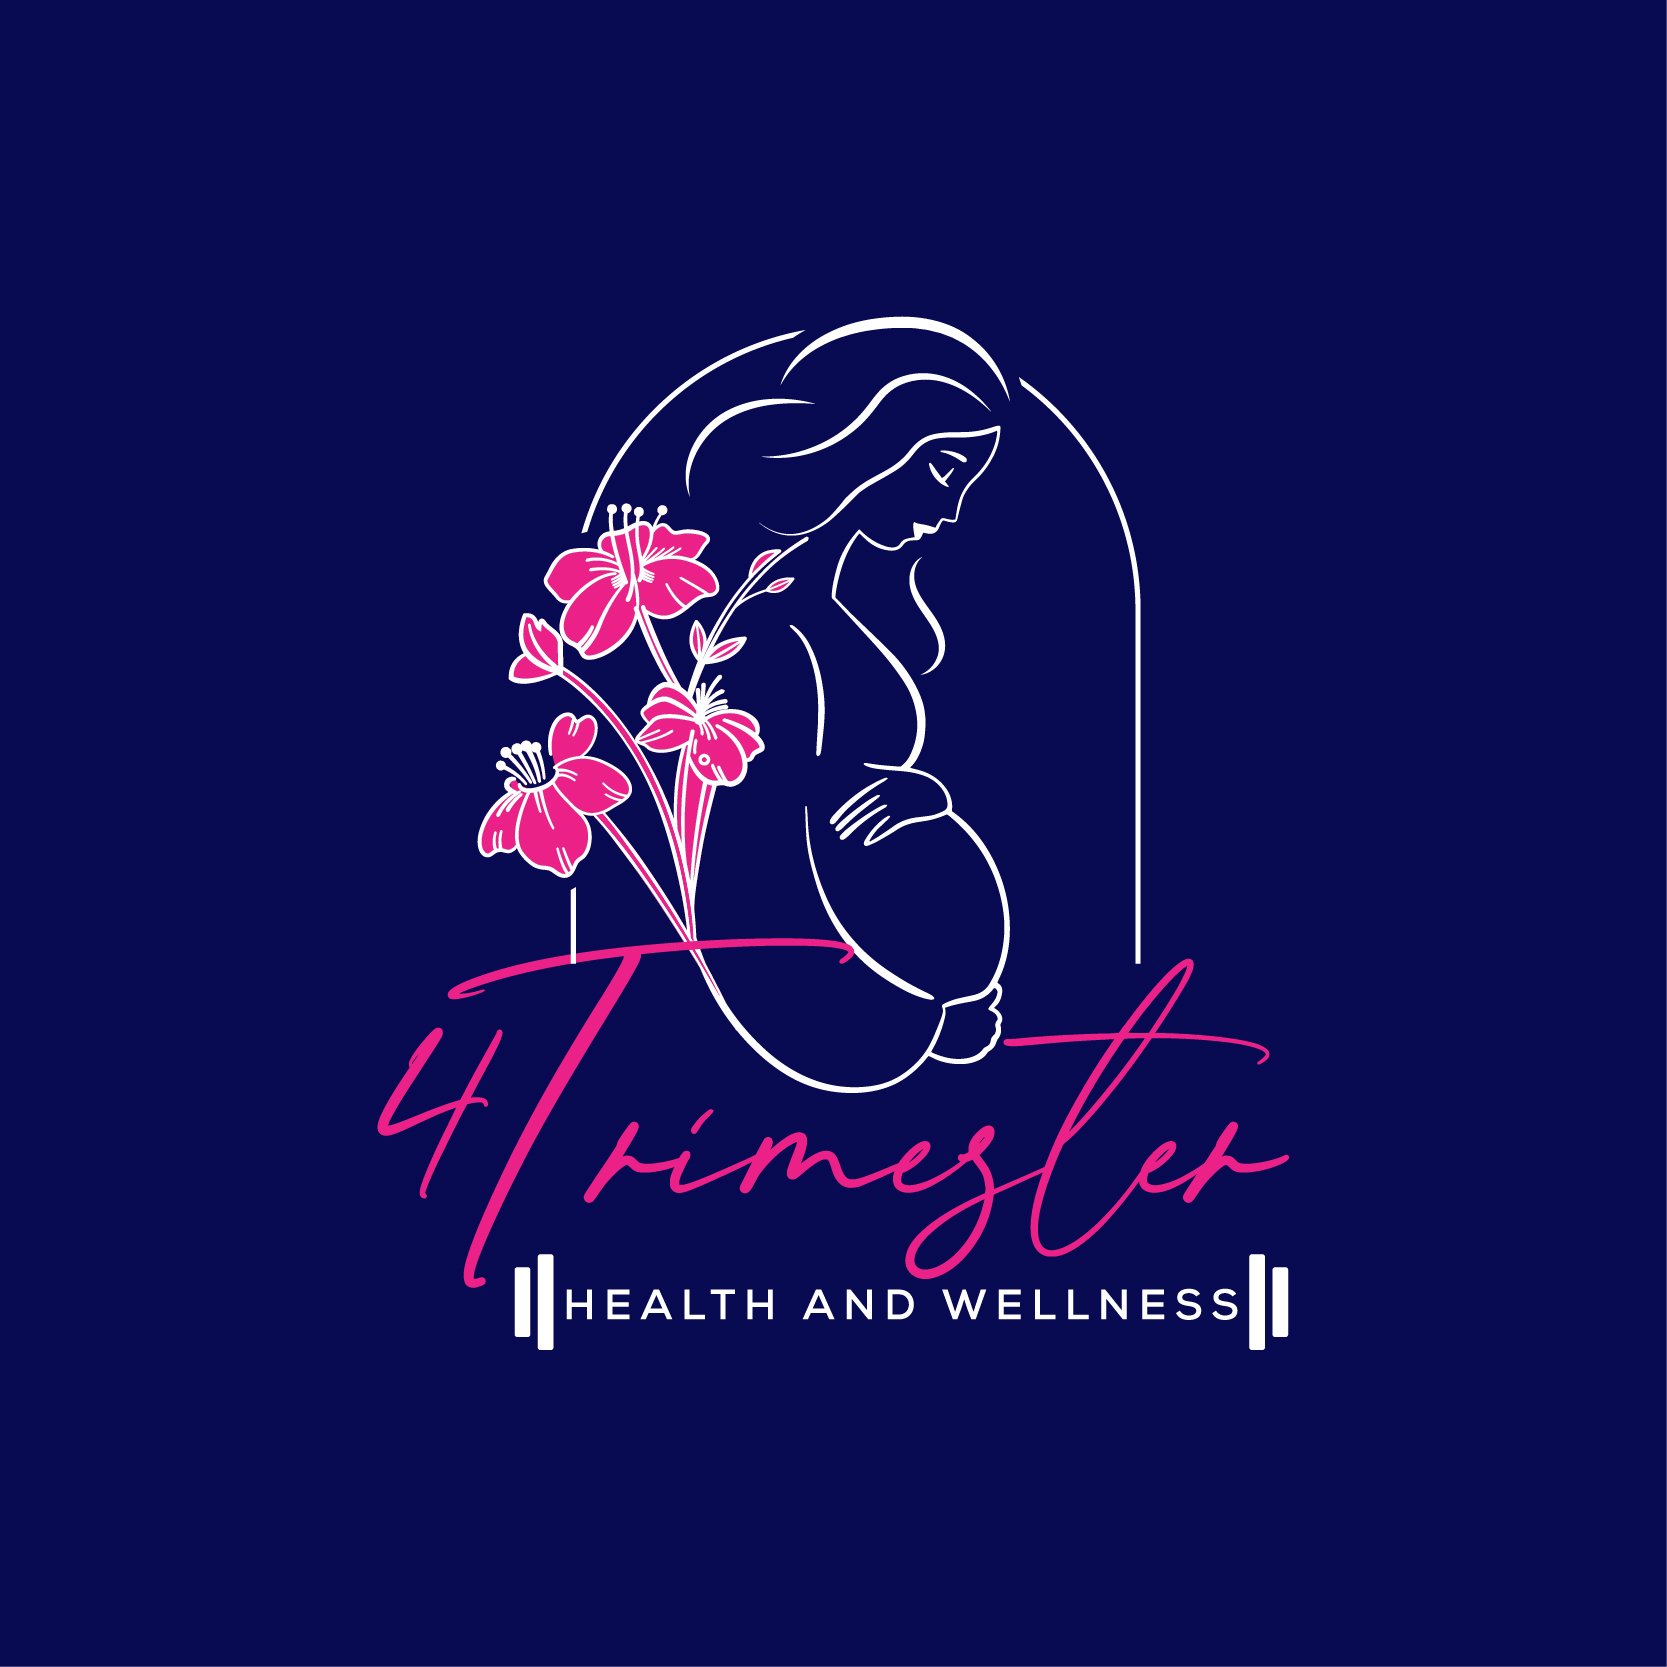 4 Trimester Health and Wellness blue and pink logo.jpg